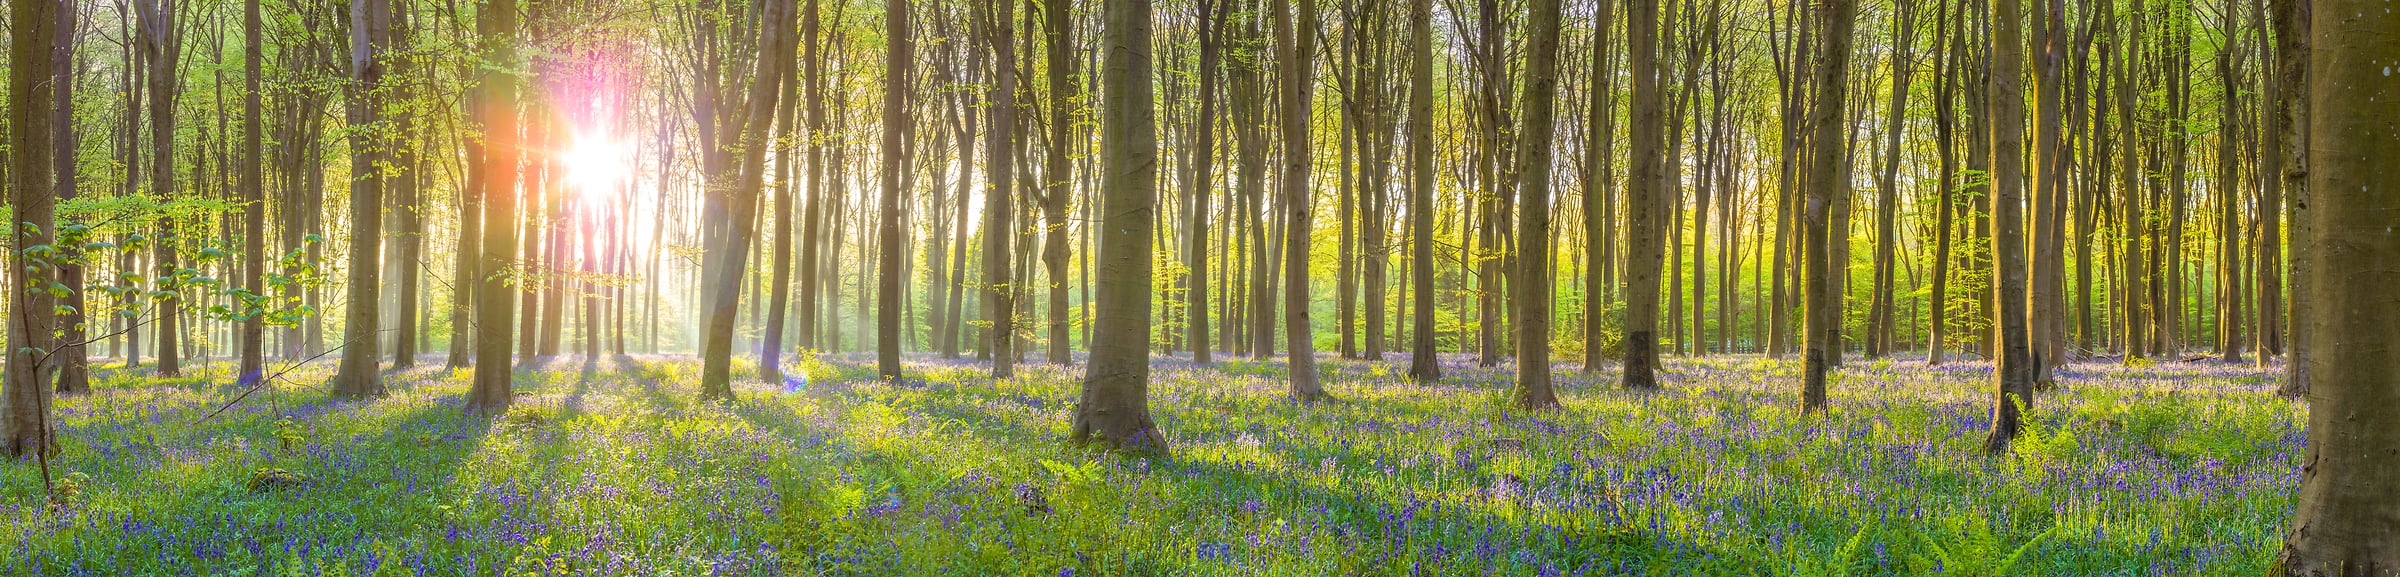 241 megapixels! A very high resolution, panorama photo of sunrise in a forest with bluebell flowers on the forest floor; nature photograph created by Assaf Frank in Micheldever Forest, Winchester, United Kingdom.